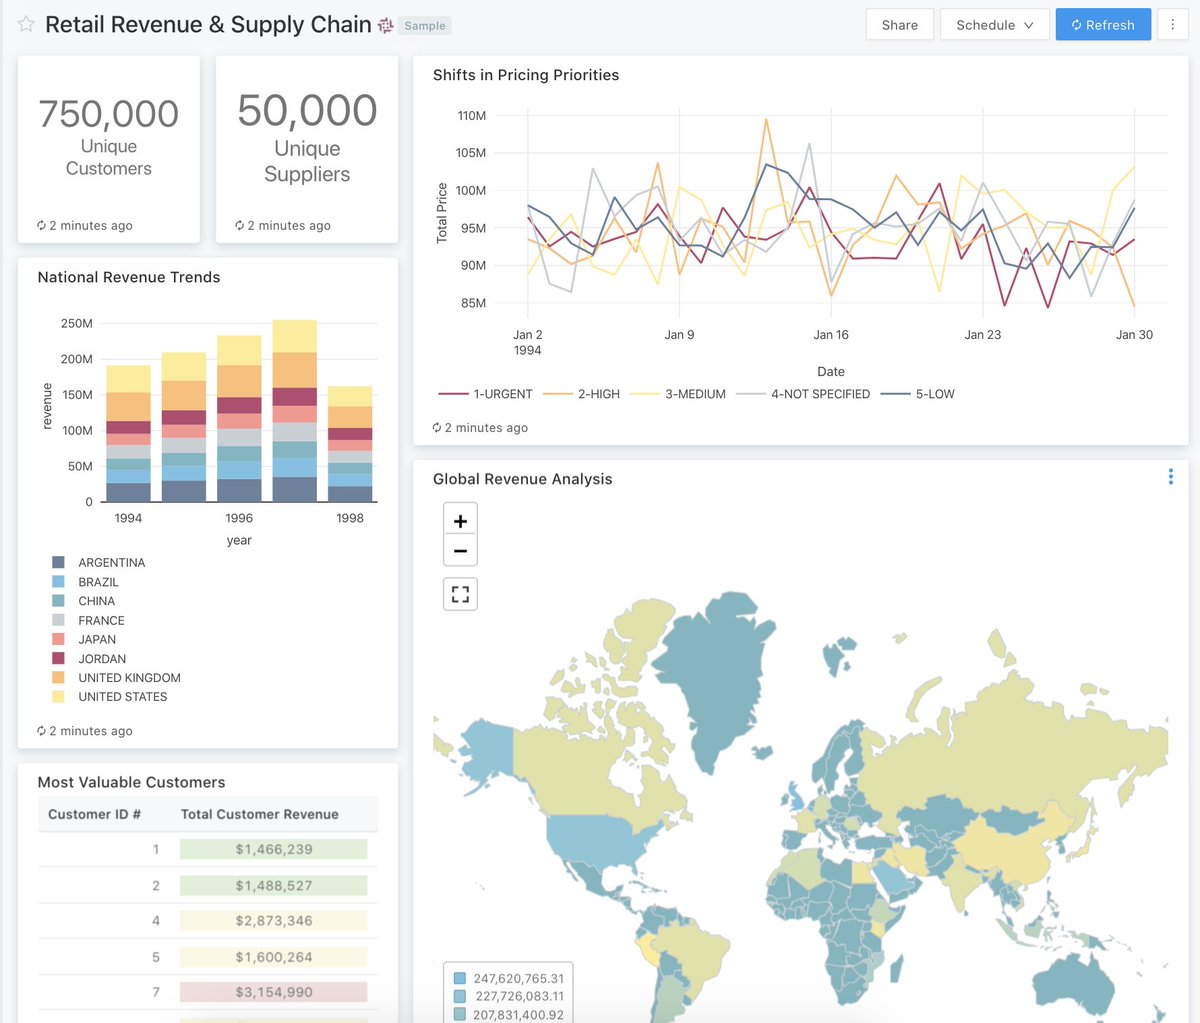 📊 Elevate your data insights with #DatabricksSQL! Our tutorial guides you through importing, exploring queries, interacting with visualizations, and sharing dashboards seamlessly. 🚀 Read more here: msft.it/6015iX5Wl